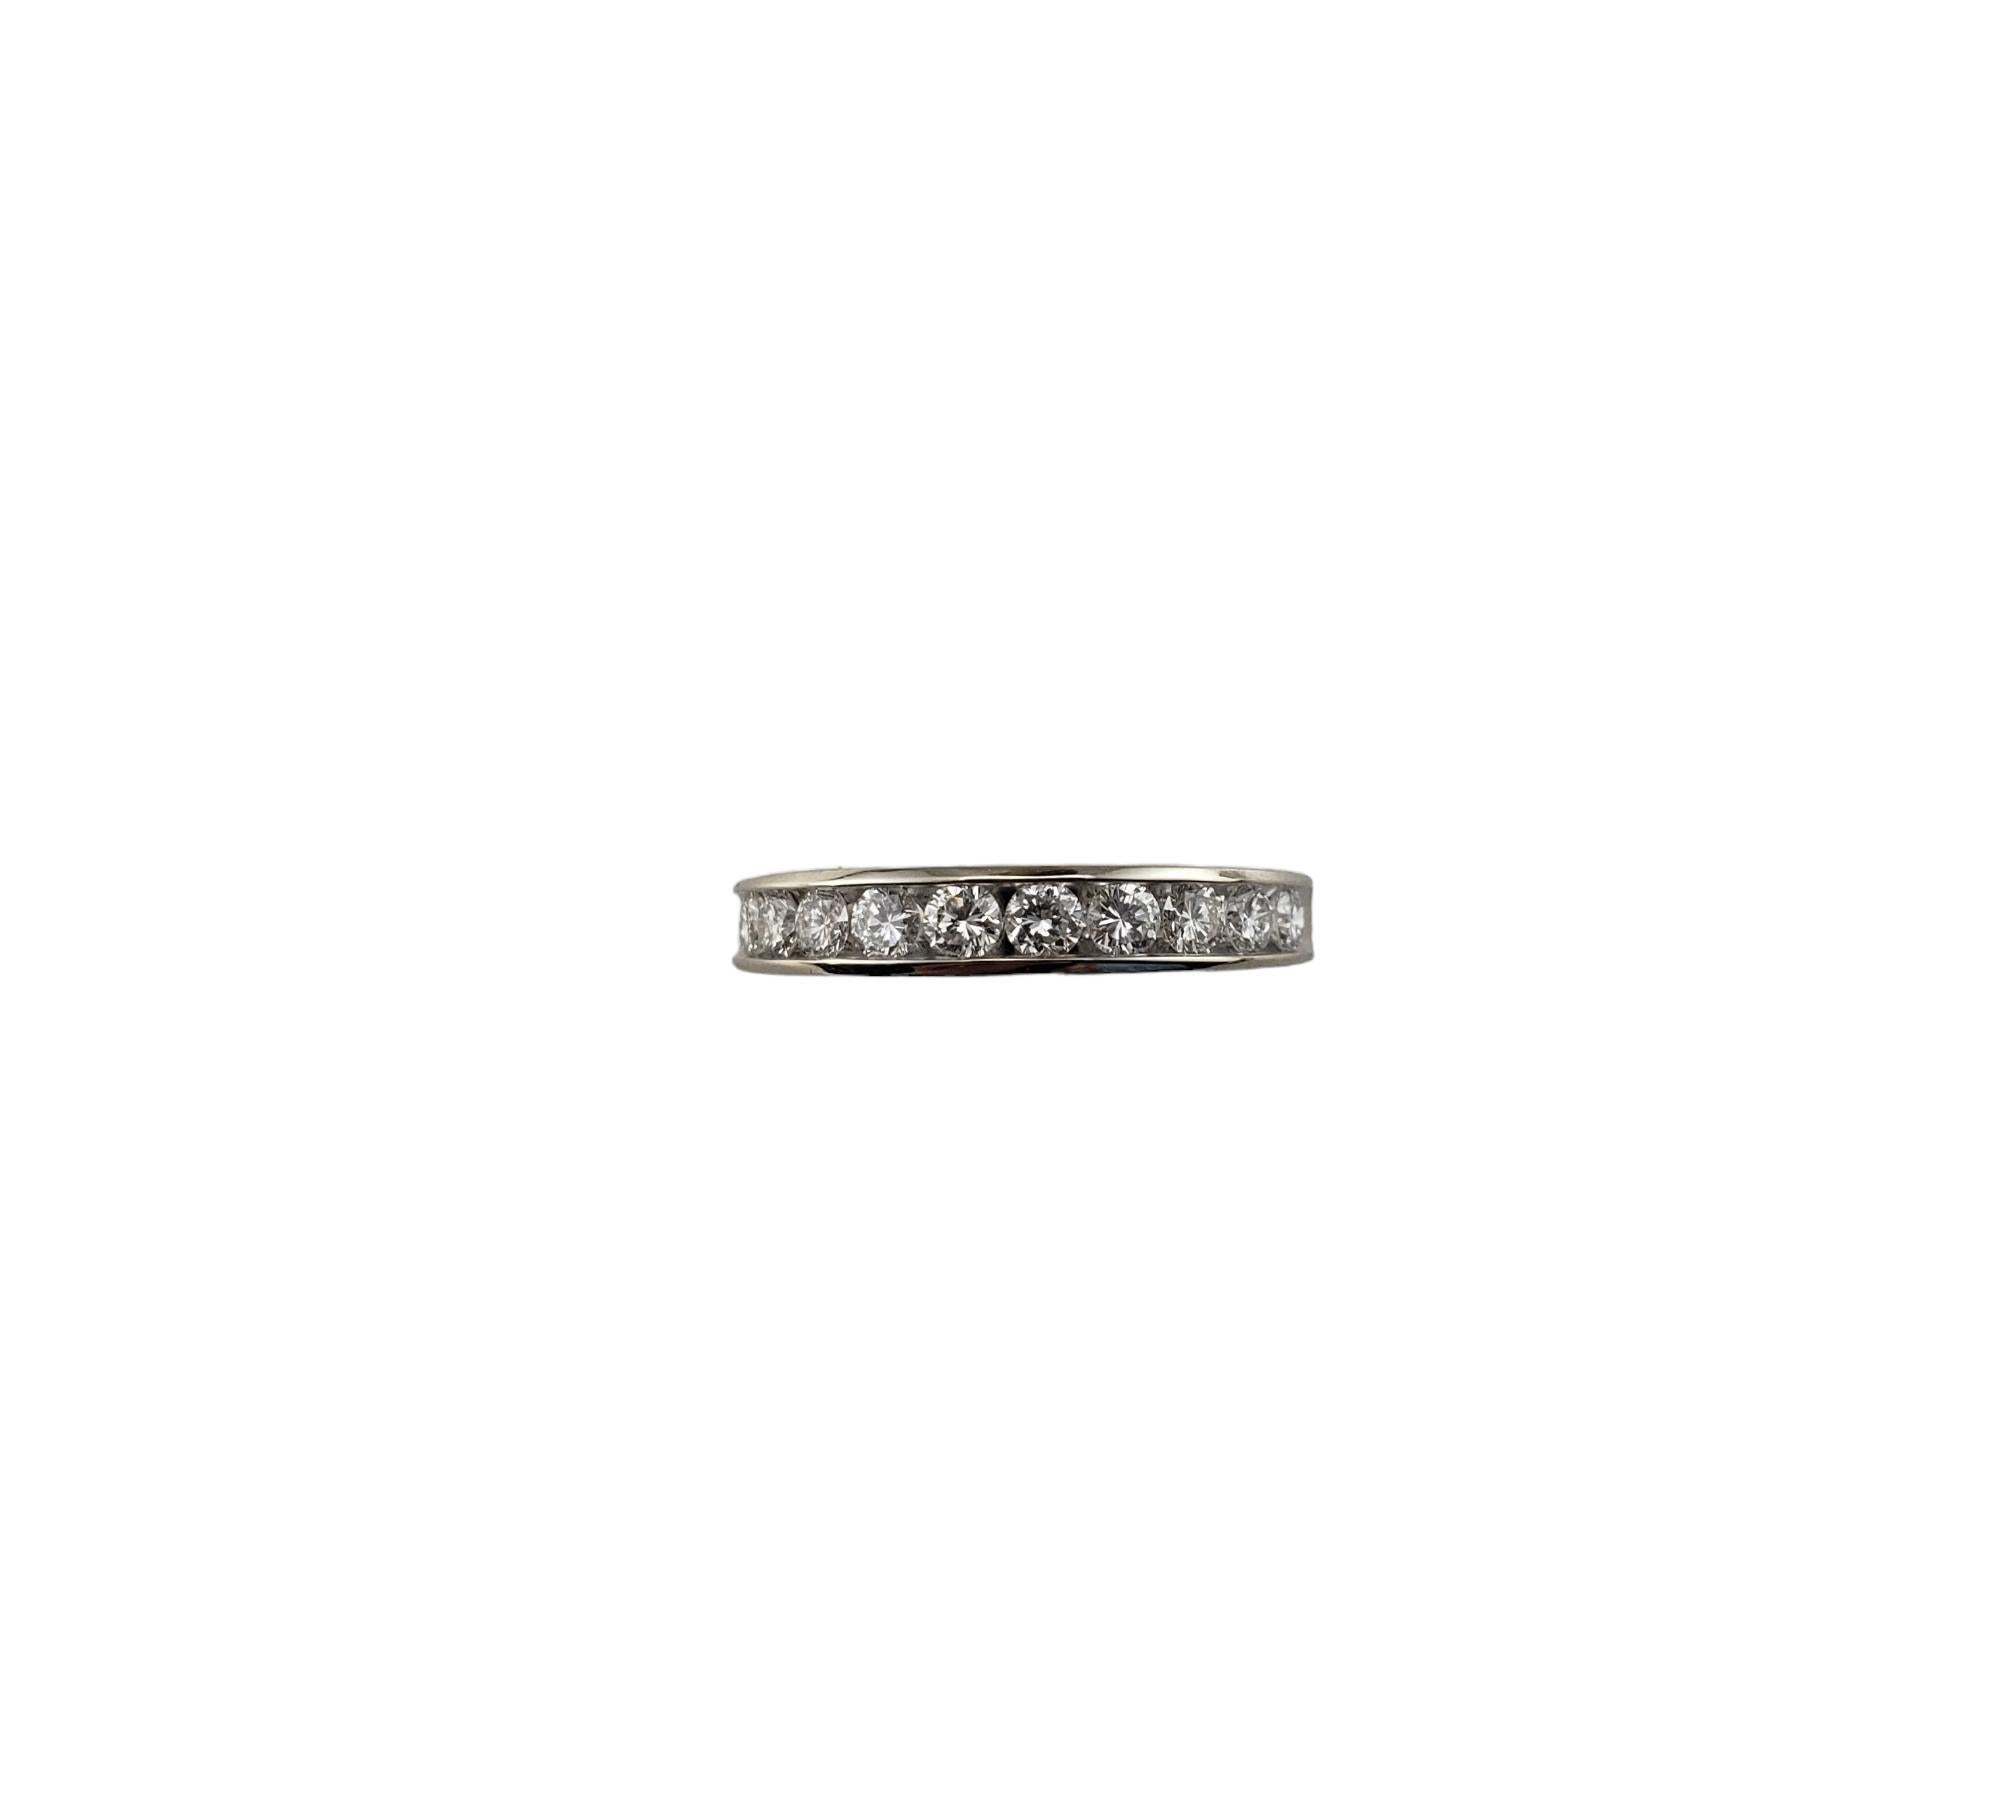 14 Karat White Gold and Diamond Band Ring Size 6-

This sparkling band features 10 round brilliant cut diamonds set in classic 14K white gold.  Width:  3 mm.  Shank:  2.3 mm.

Approximate total diamond weight:  .50 ct.

Diamond Color:  G

Diamond